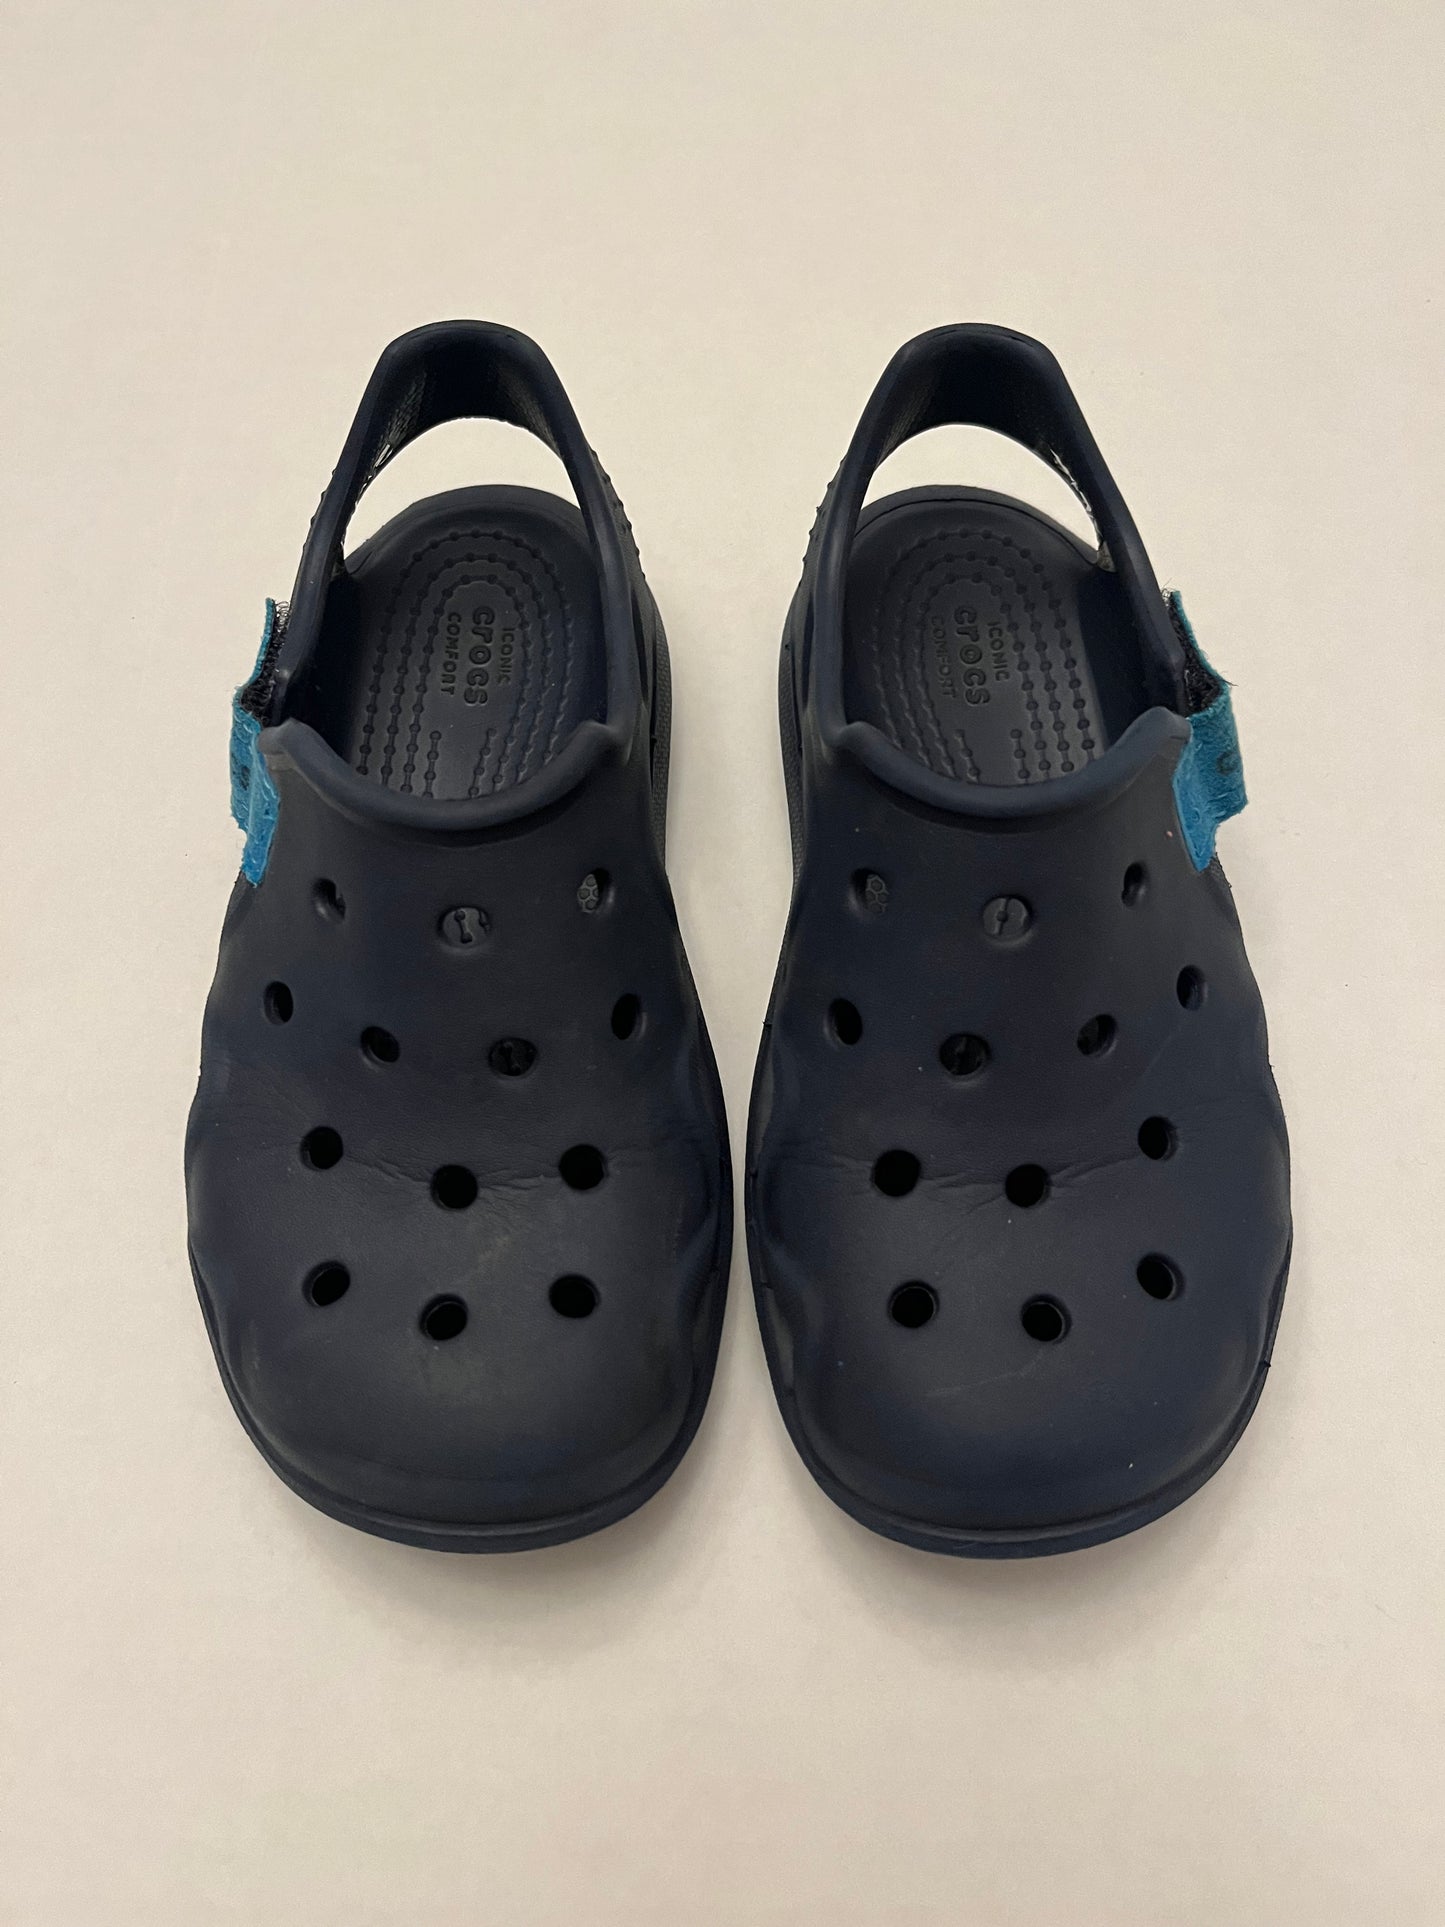 Crocs navy swiftwater shoes size 11. PPU Mariemont